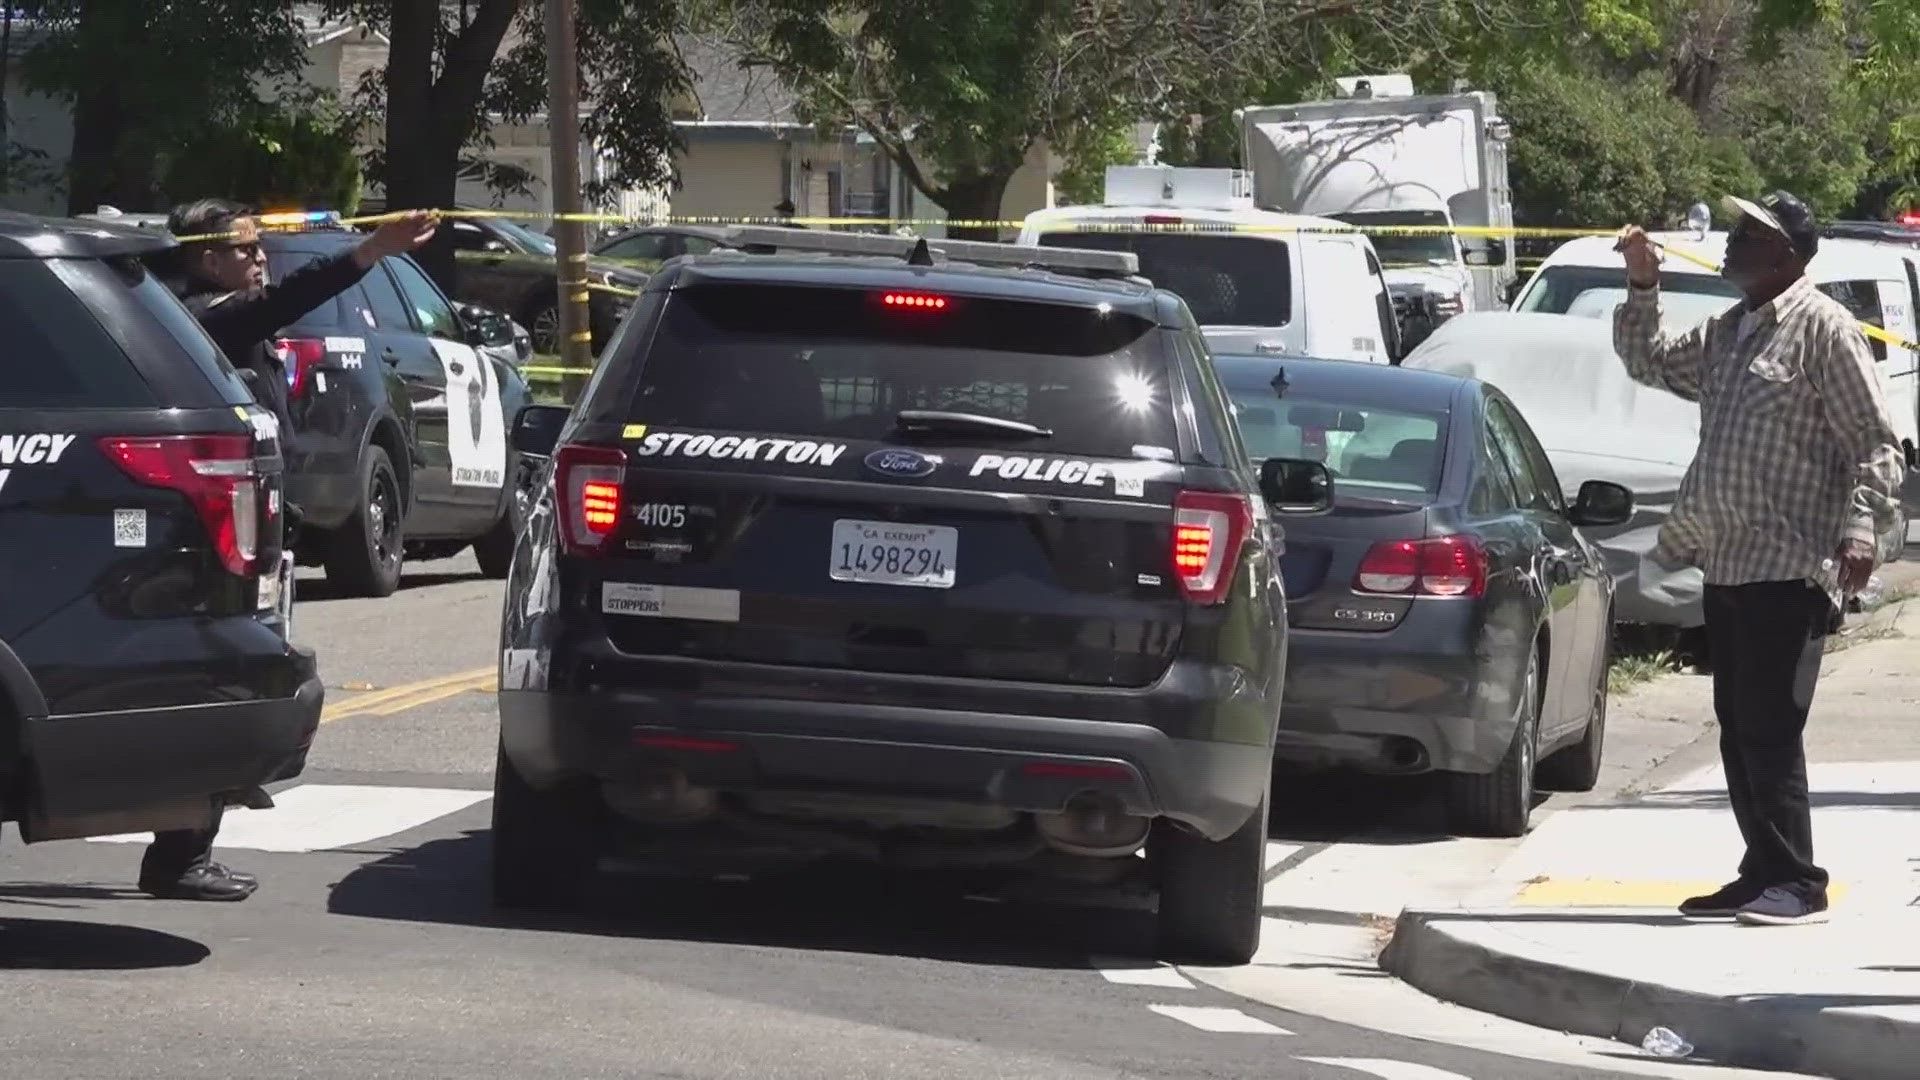 Just after 9:30 a.m., officers responded to the 600 block of El Camino Avenue to a report of the shooting.